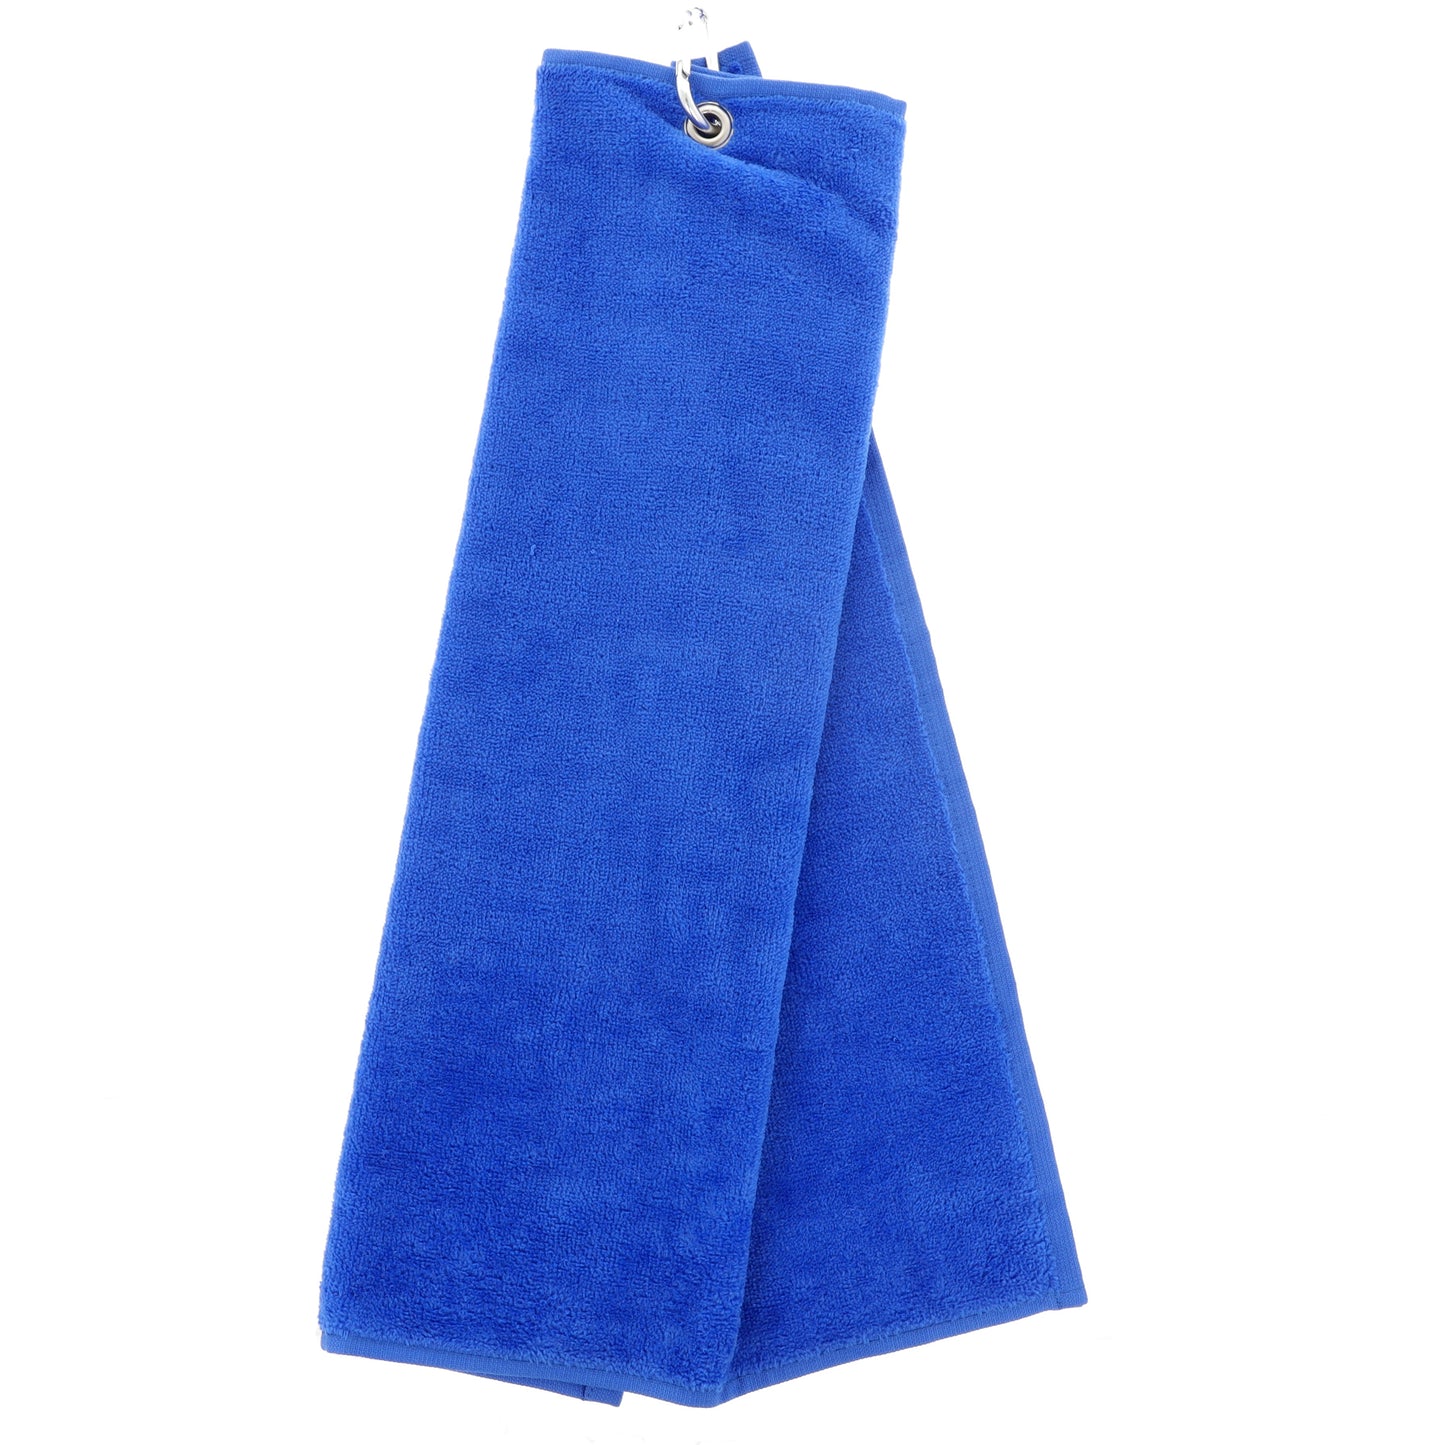 Personalised Embroidered Tri Fold GOLF Towel Trifold Towel with Carabiner Clip  - Always Looking Good - Royal Blue  